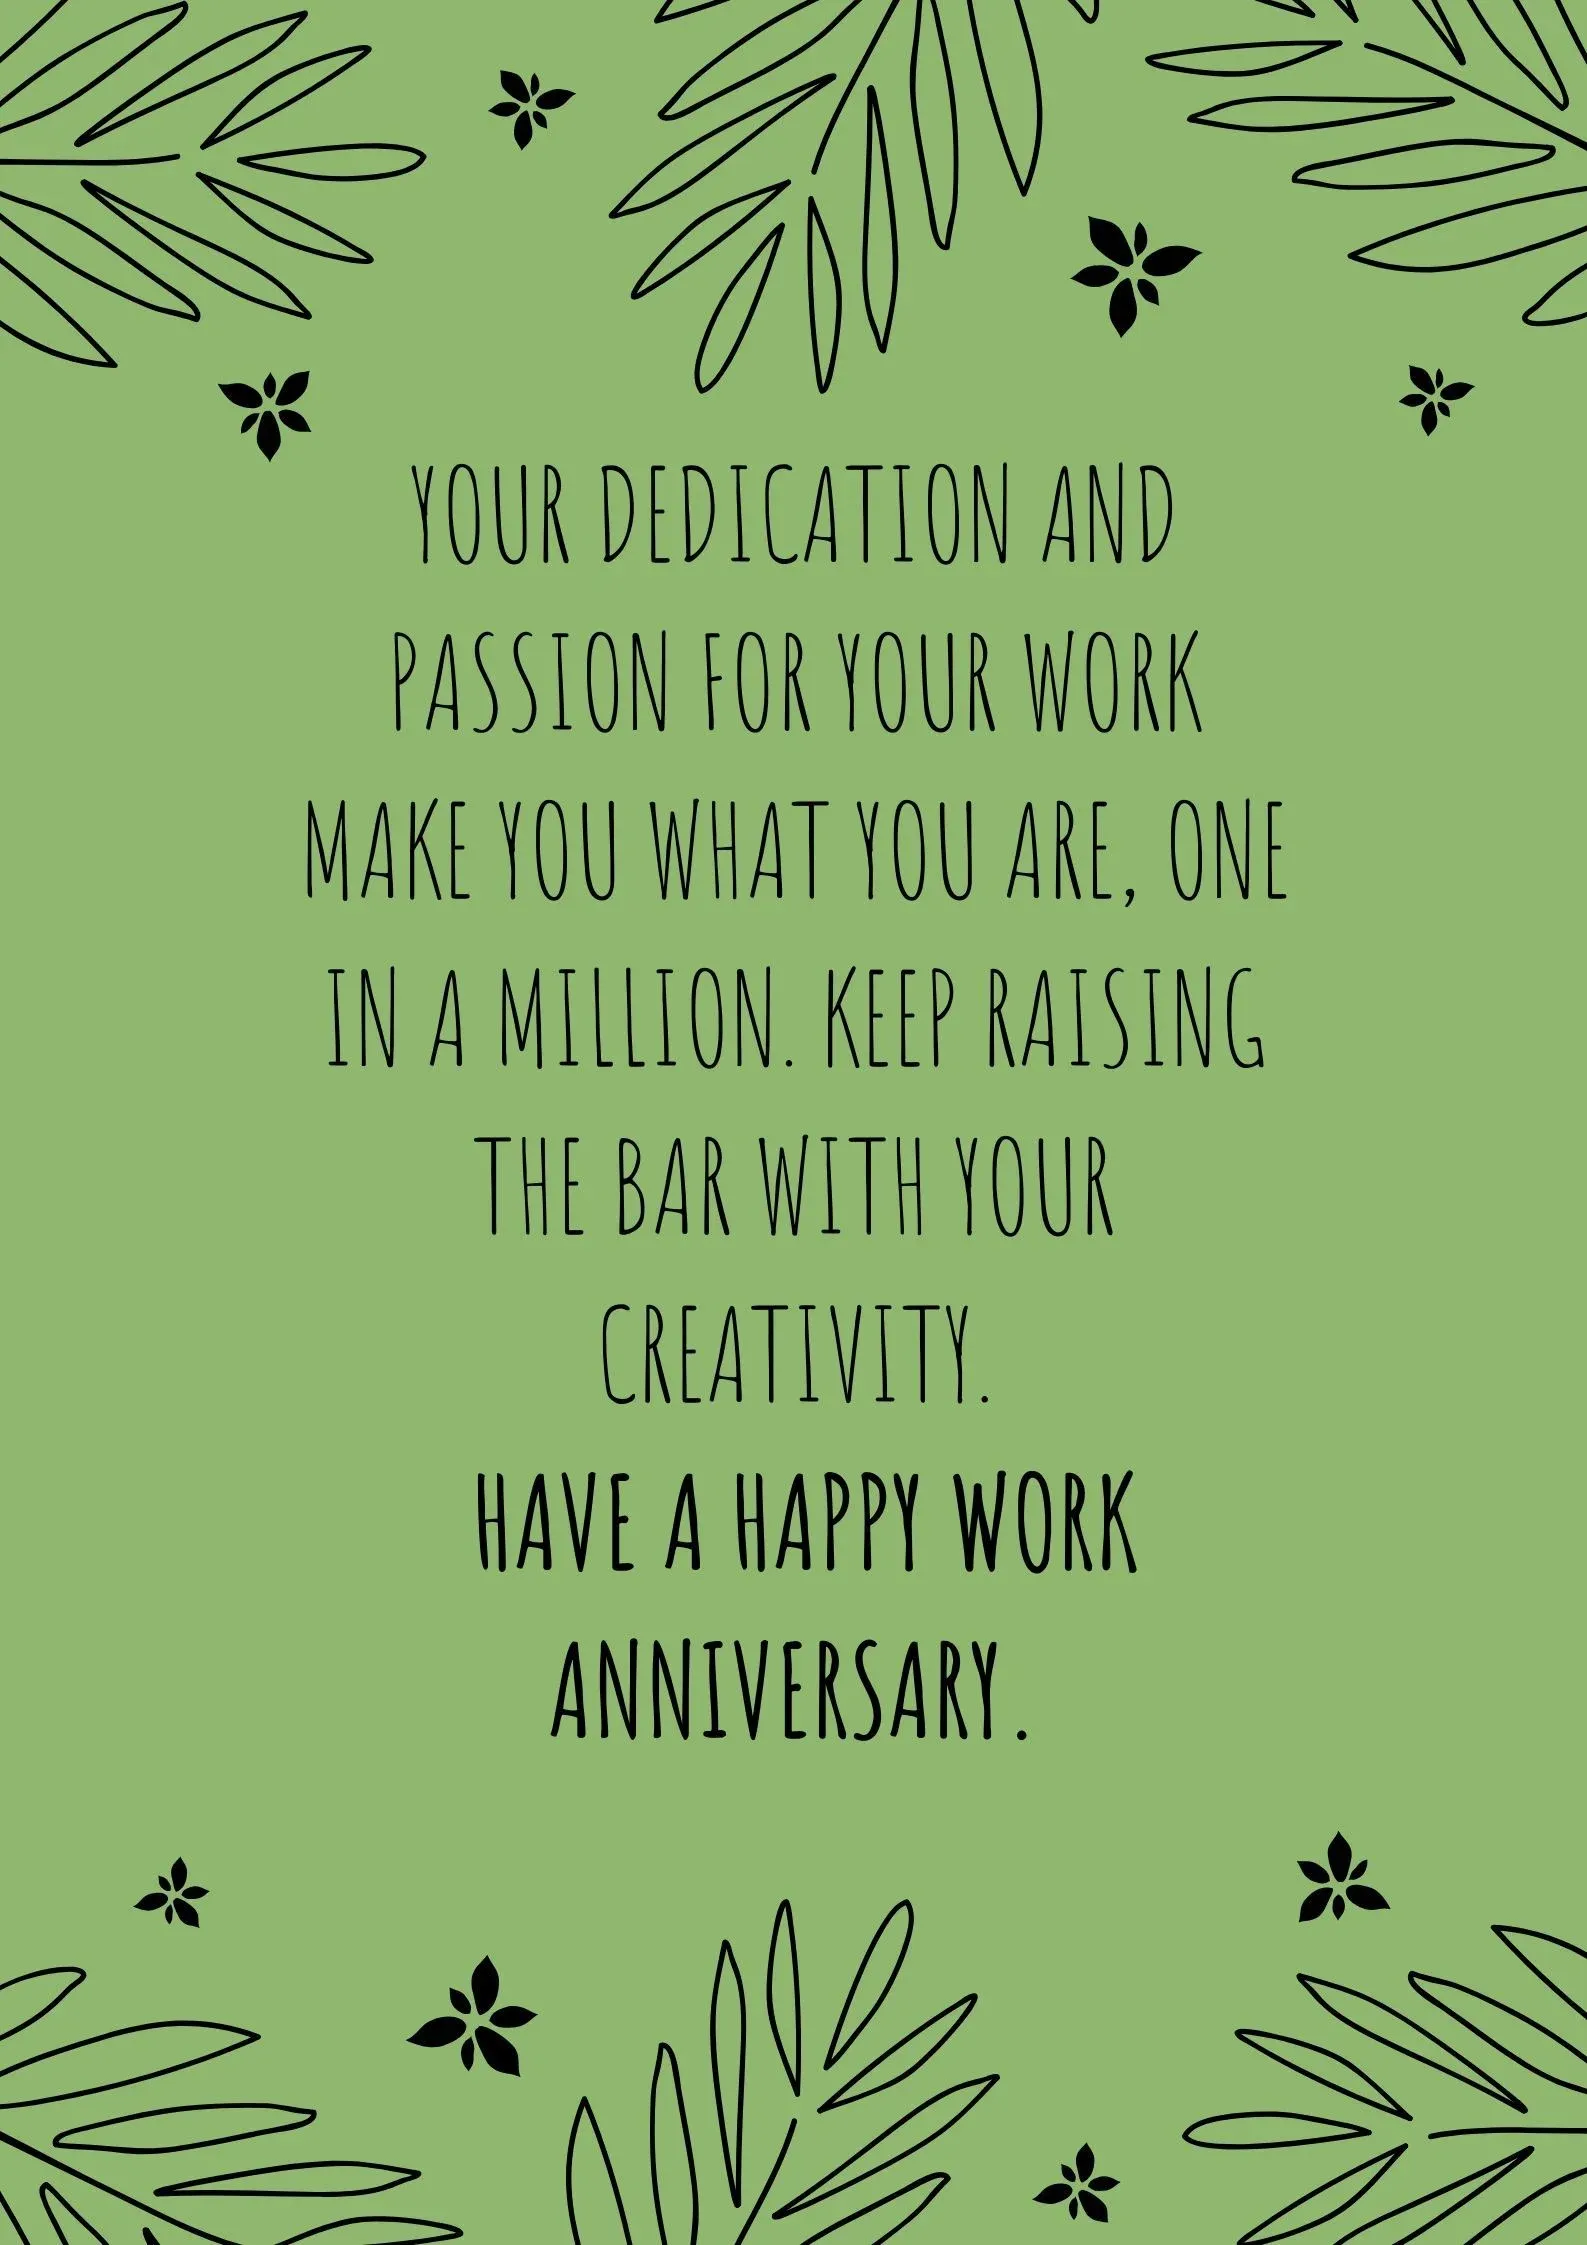 50 Work Anniversary Wishes for Peers & Employees | Empuls